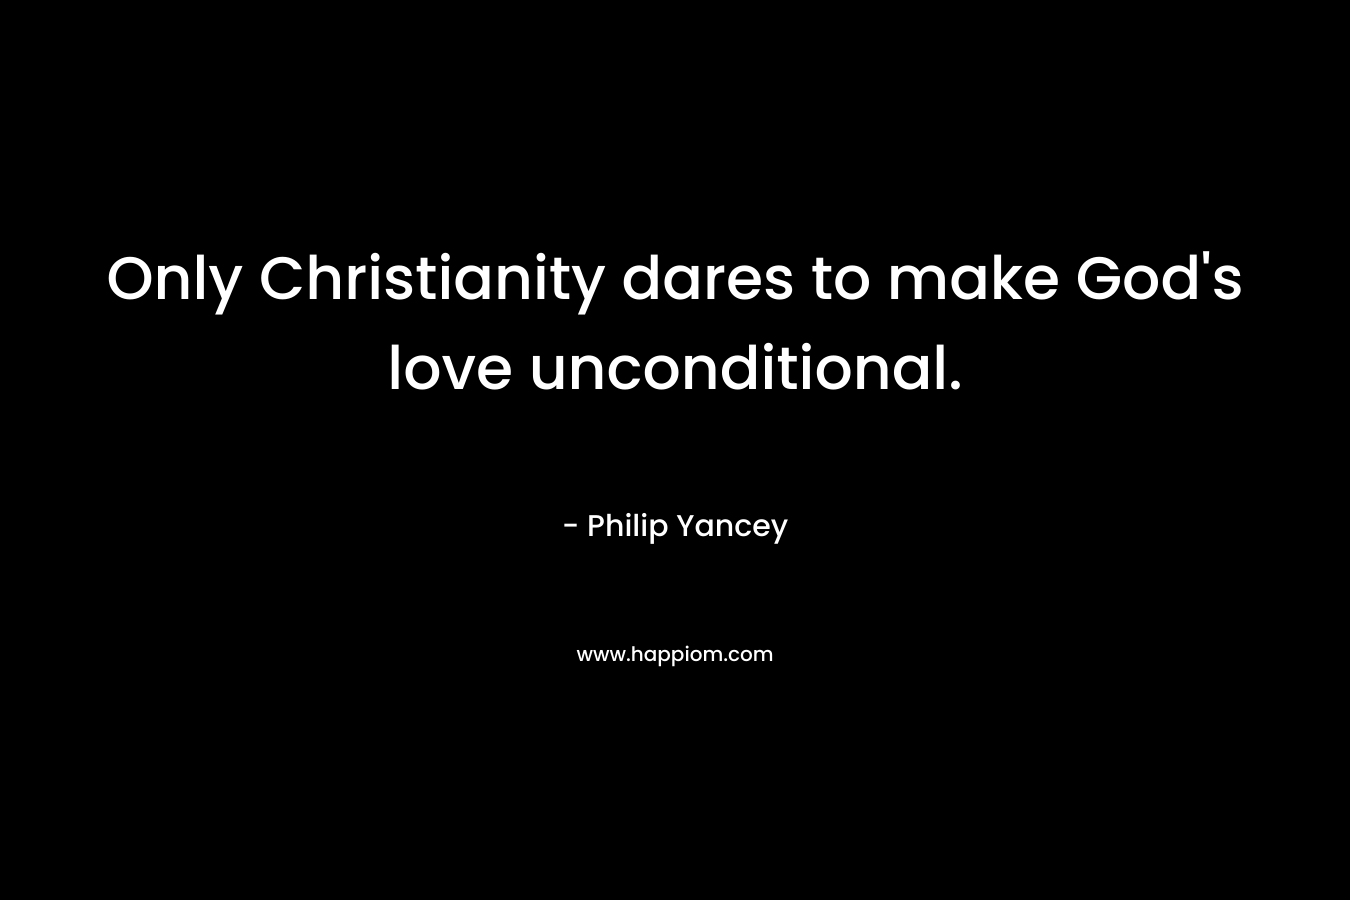 Only Christianity dares to make God's love unconditional.